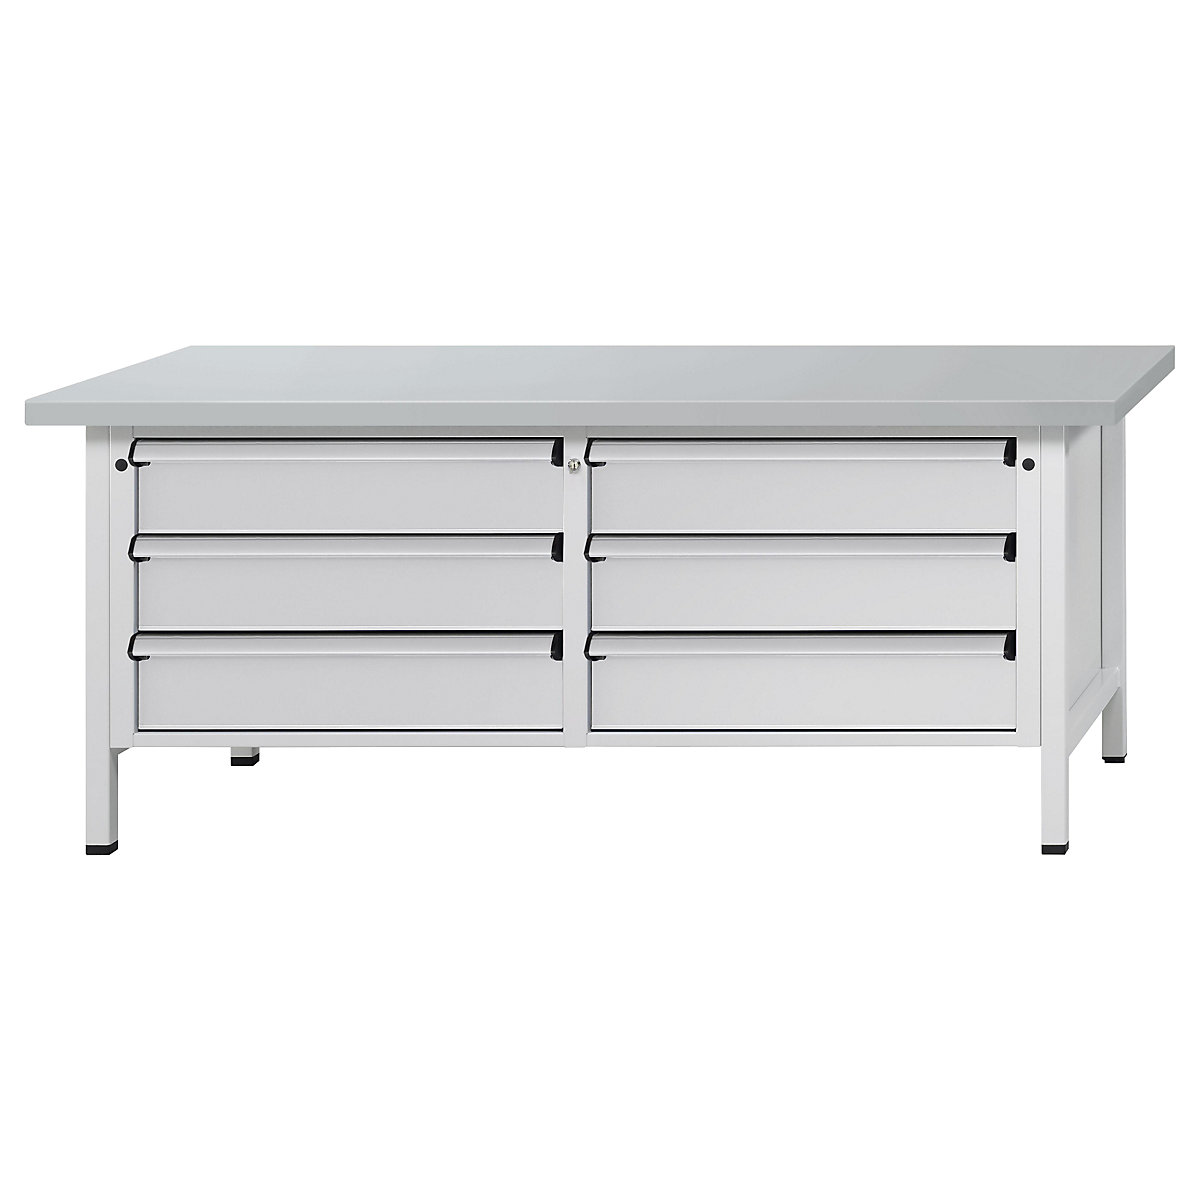 Workbench with XL/XXL drawers, frame construction – ANKE, width 2000 mm, 6 x 180 mm drawers, sheet steel covered worktop, front in light grey-12